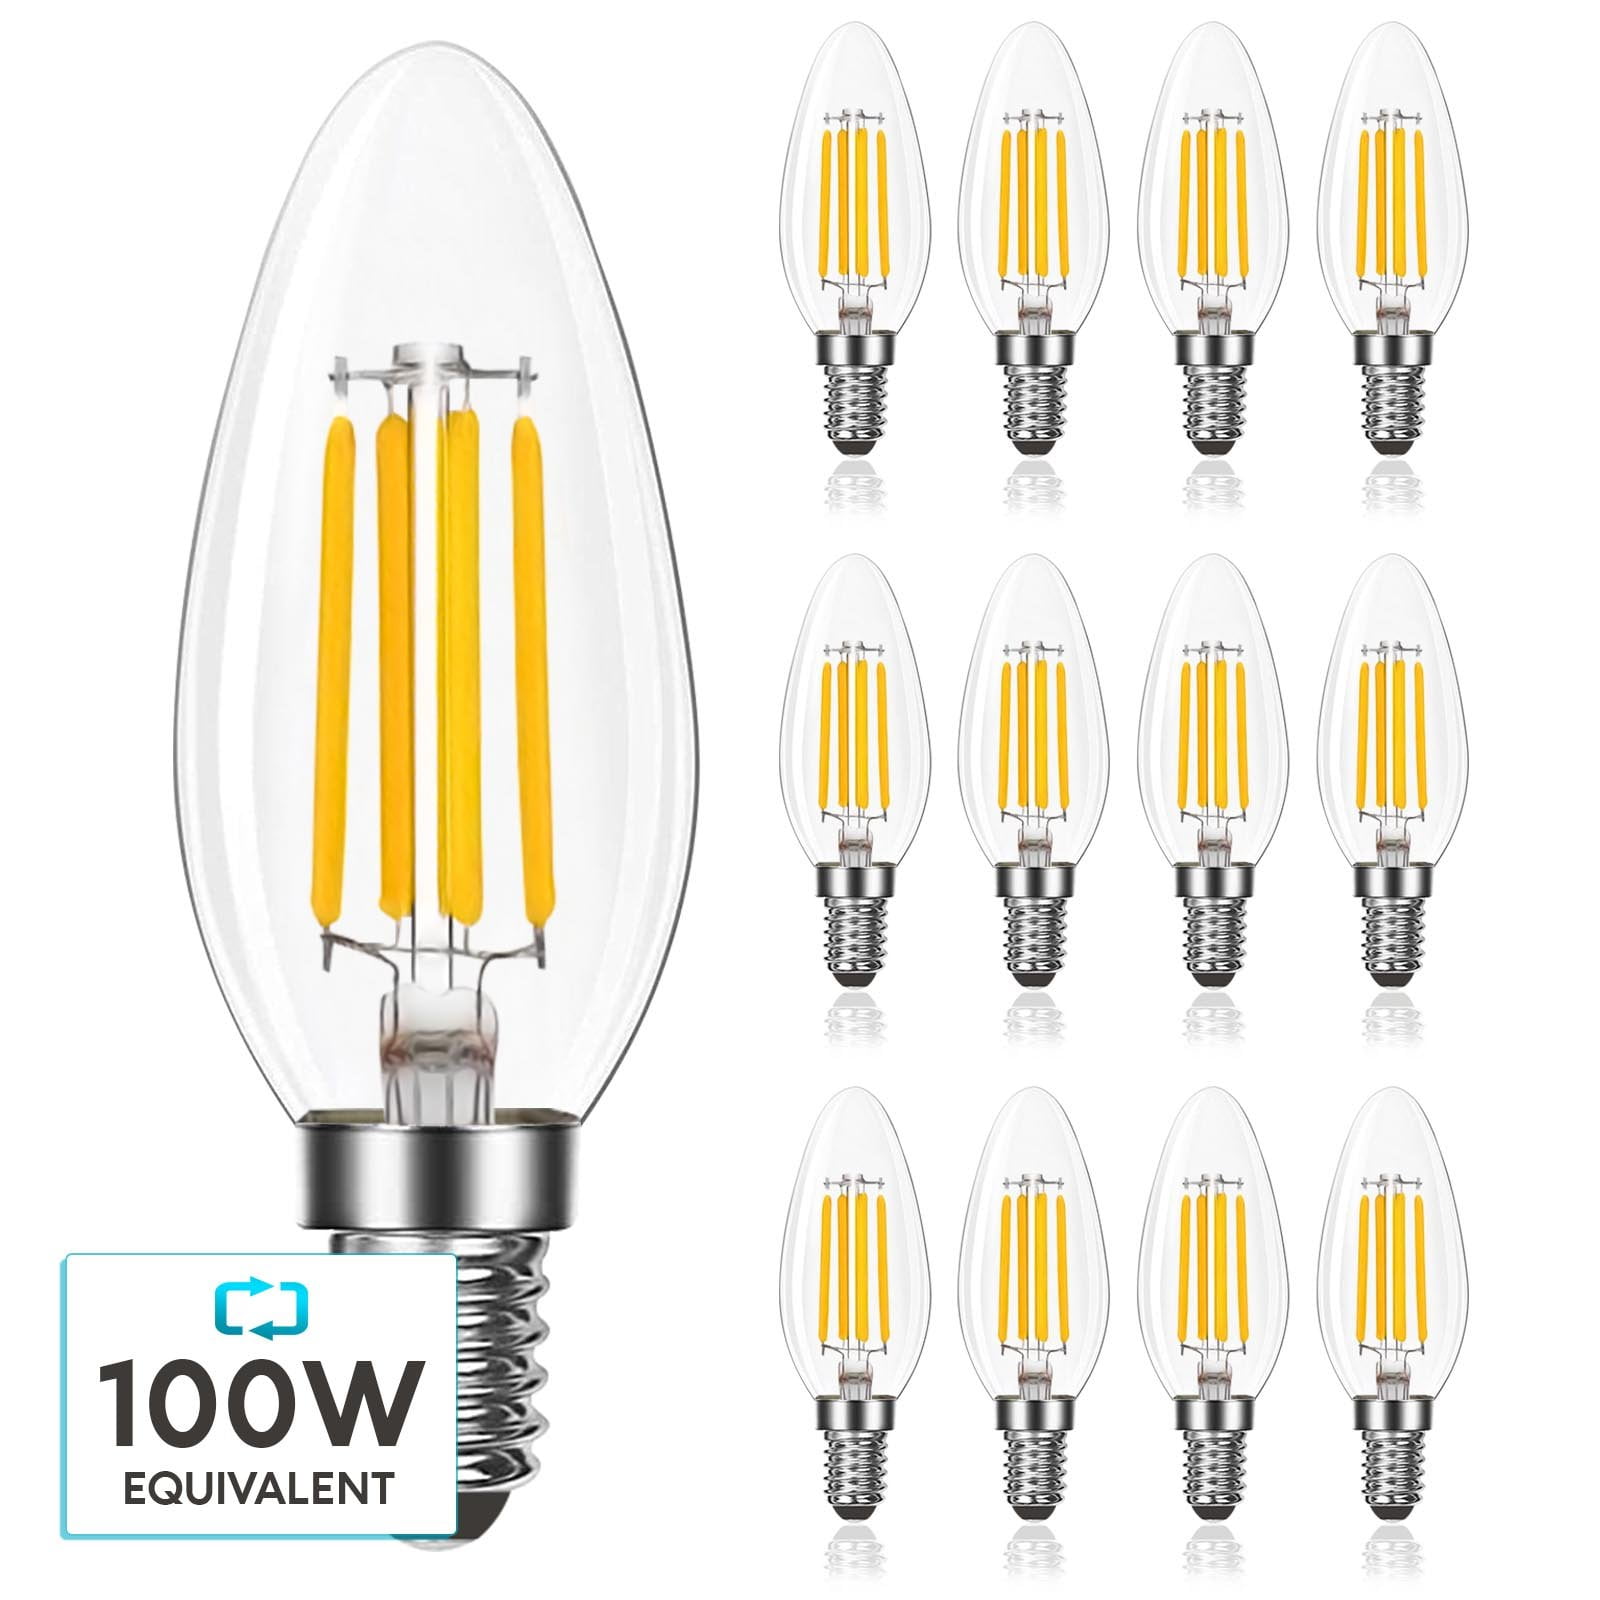 6X 6W 9W 12W 15W E12 Candelabra Dimmable LED Candle Bulbs Energy Saving Lamps 